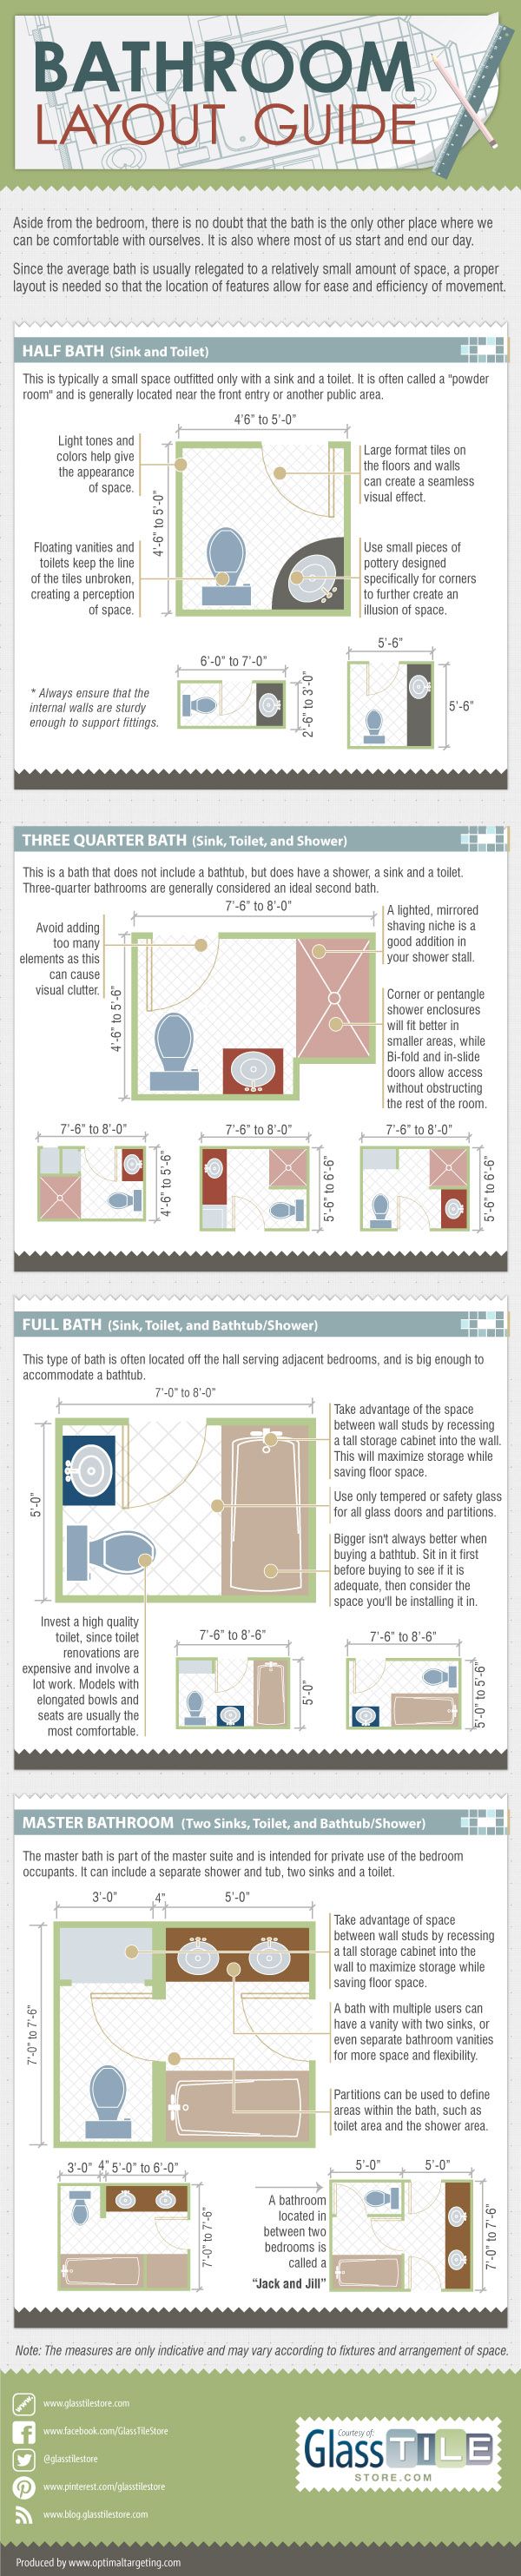 bathroom-layout-guide